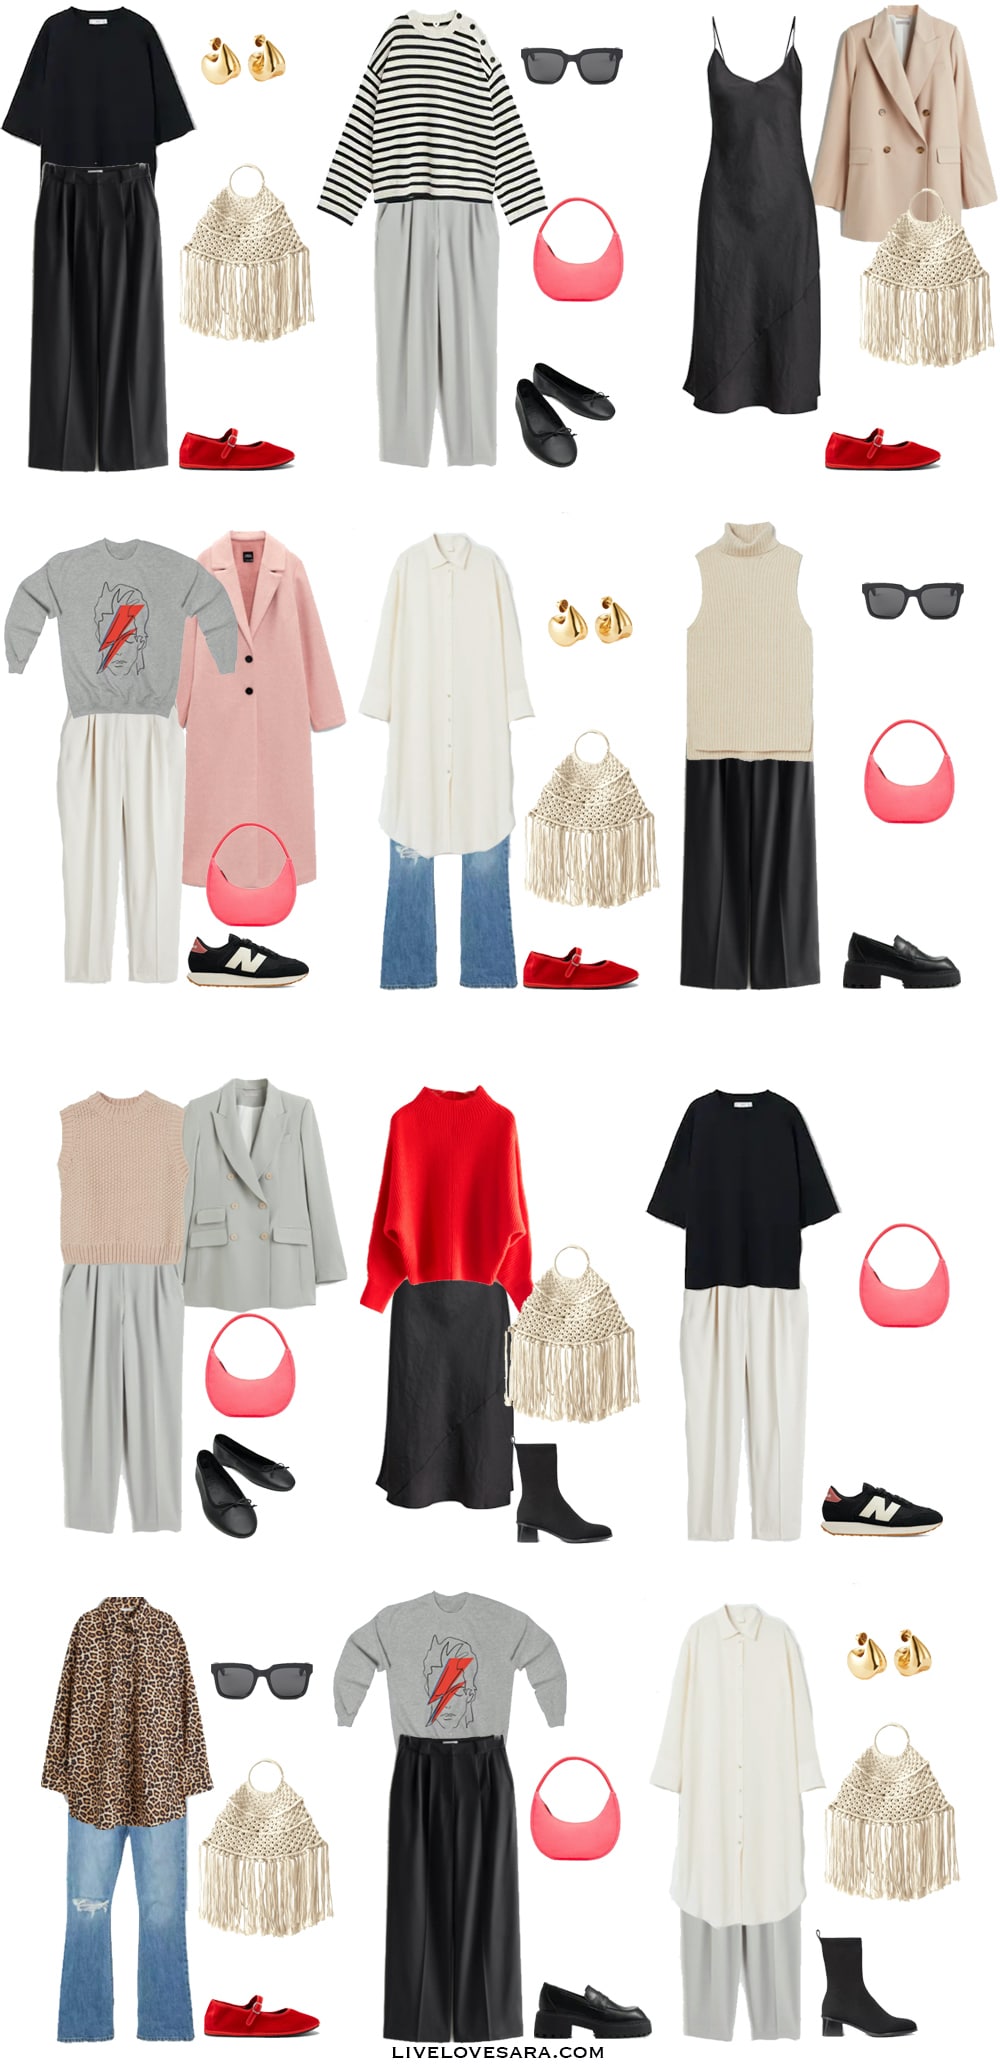 A white background with outfits 13-24 built from the spring minimalist capsule wardrobe 2022.